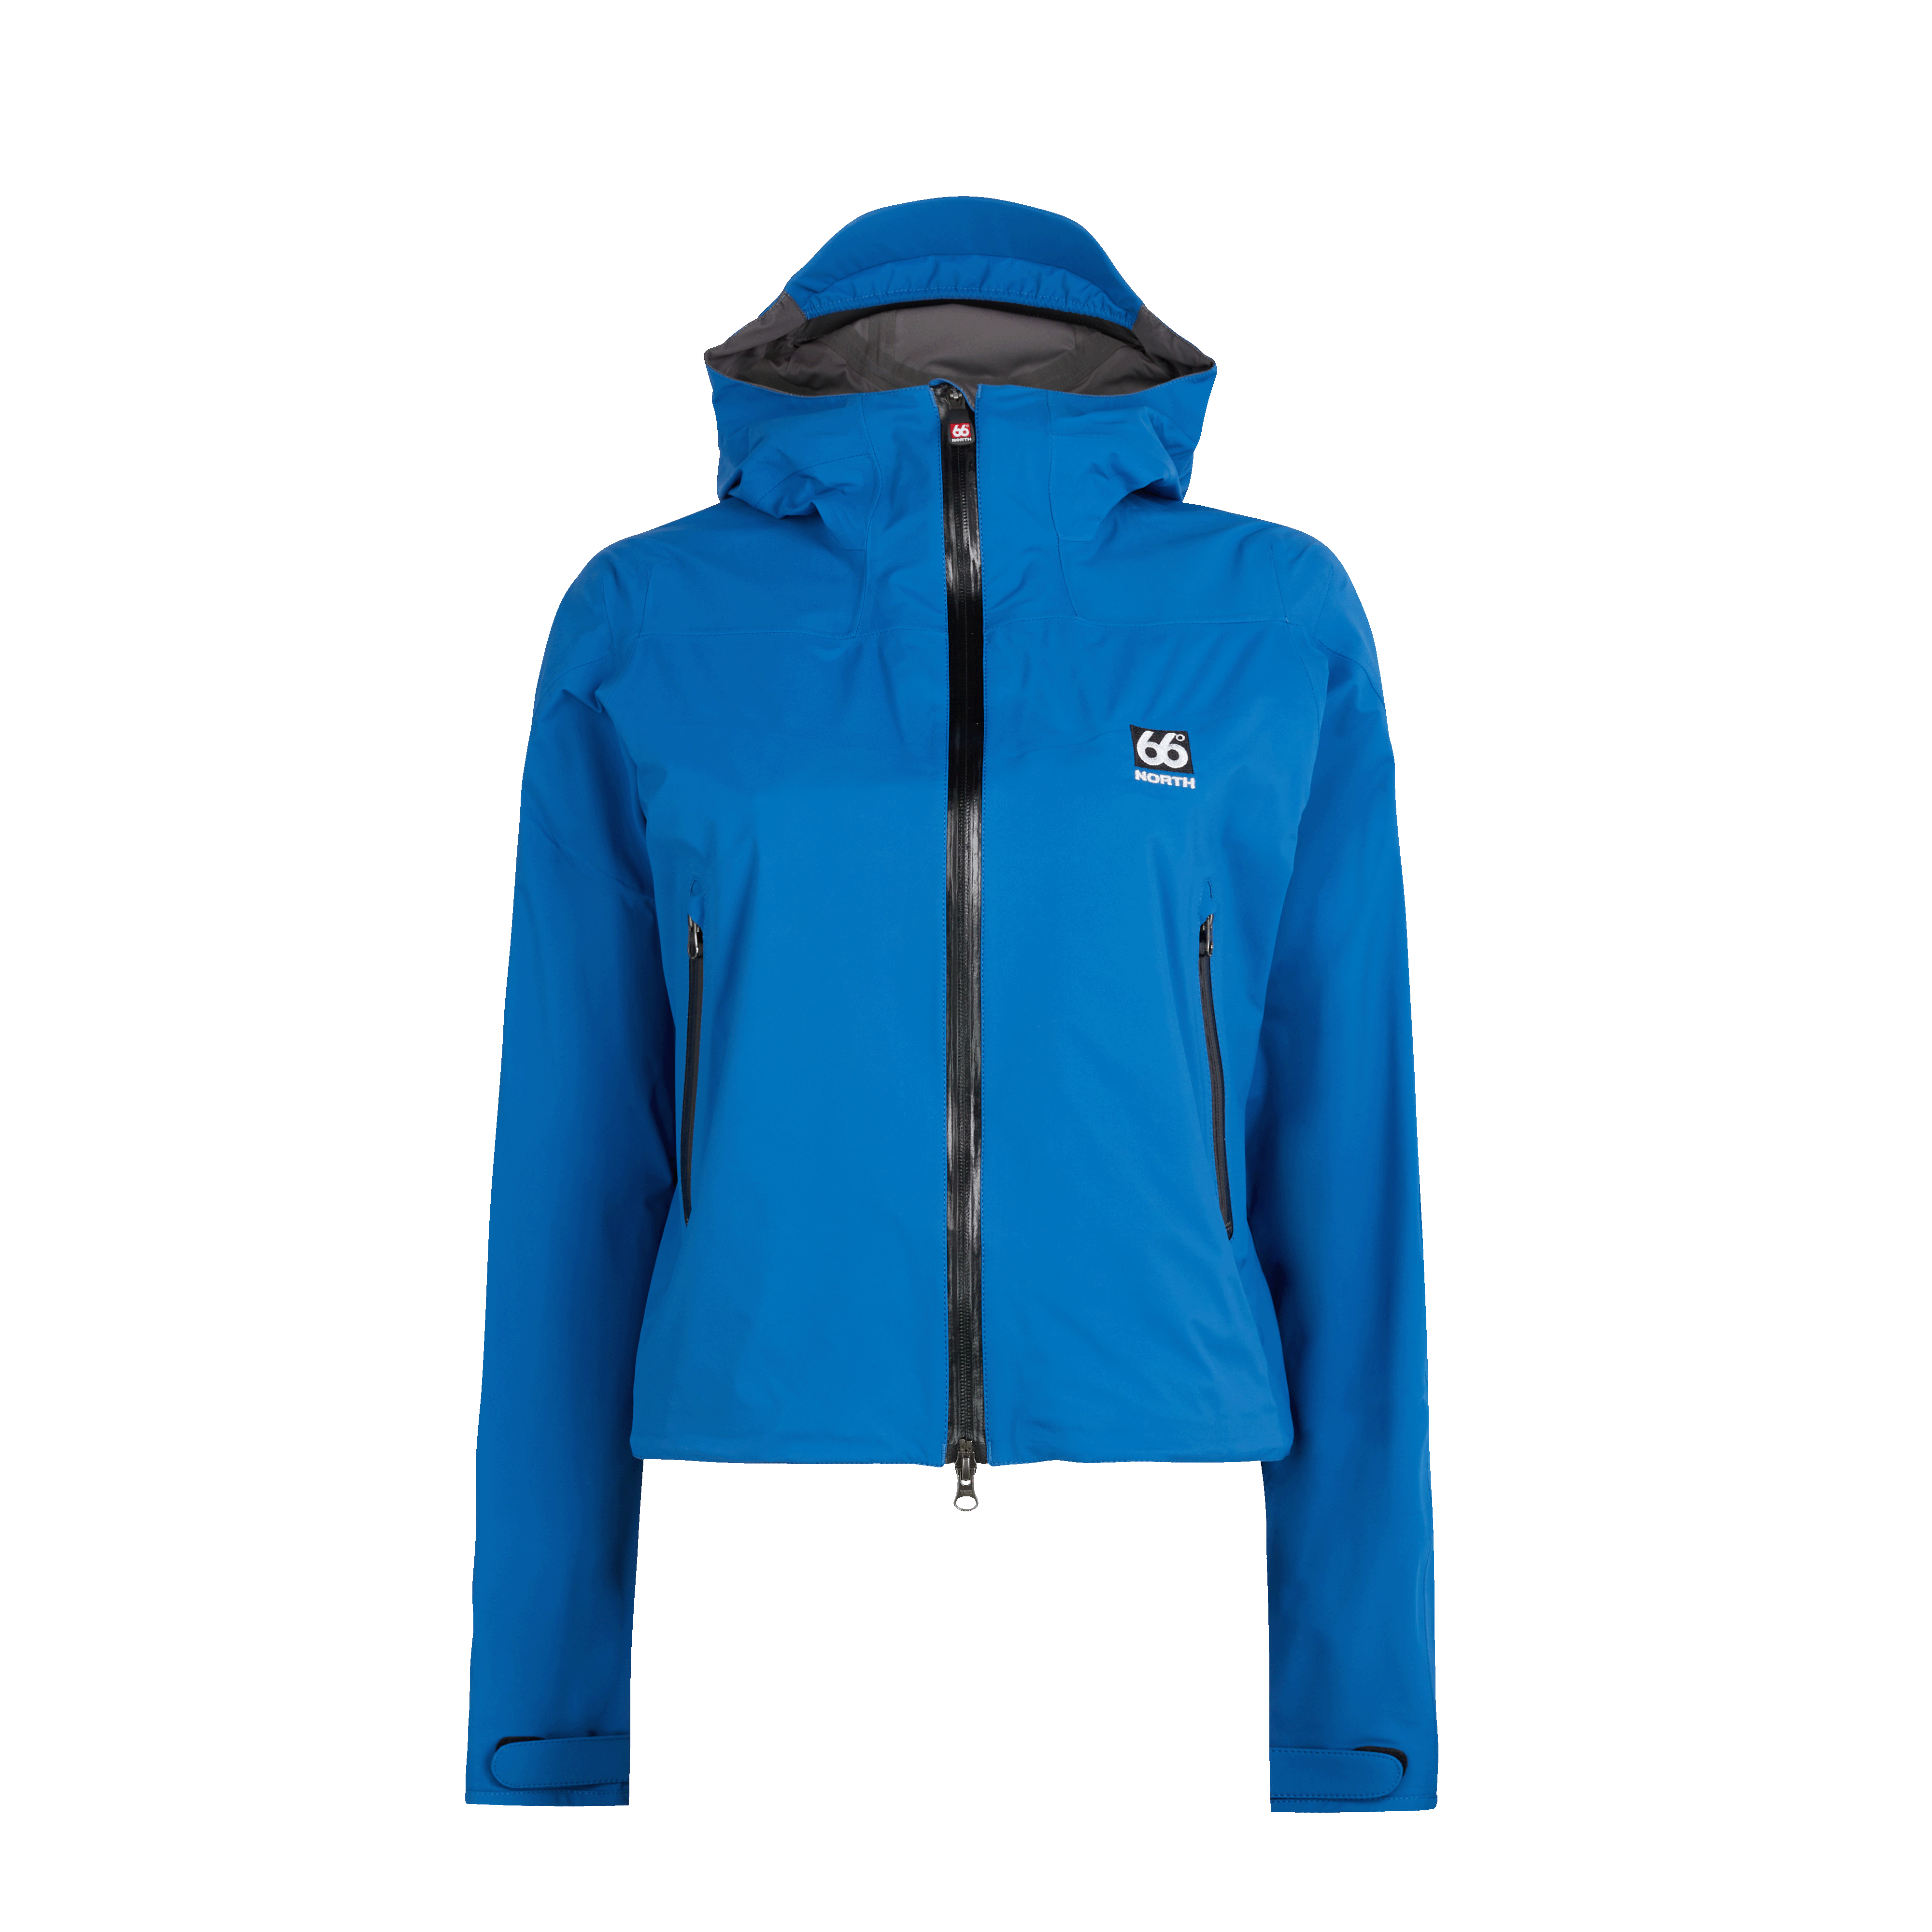 66 North Women's Snæfell Jackets & Coats In Blue